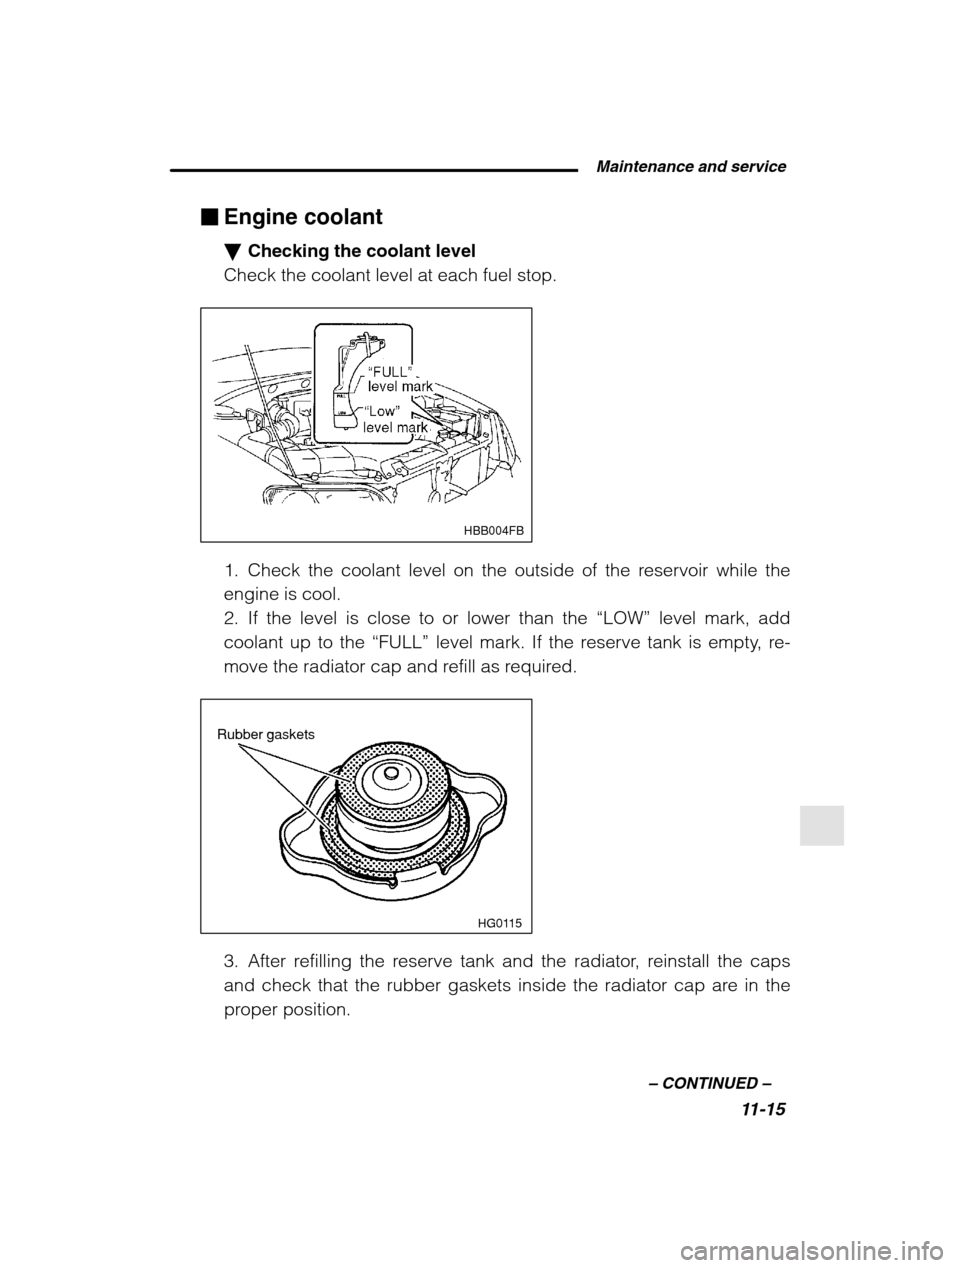 SUBARU LEGACY 2002 3.G Owners Manual  Maintenance and service11-15
–
 CONTINUED  –
�Engine coolant �Checking the coolant level
Check the coolant level at each fuel stop.
HBB004FB
1. Check the coolant level on the outside of the reser